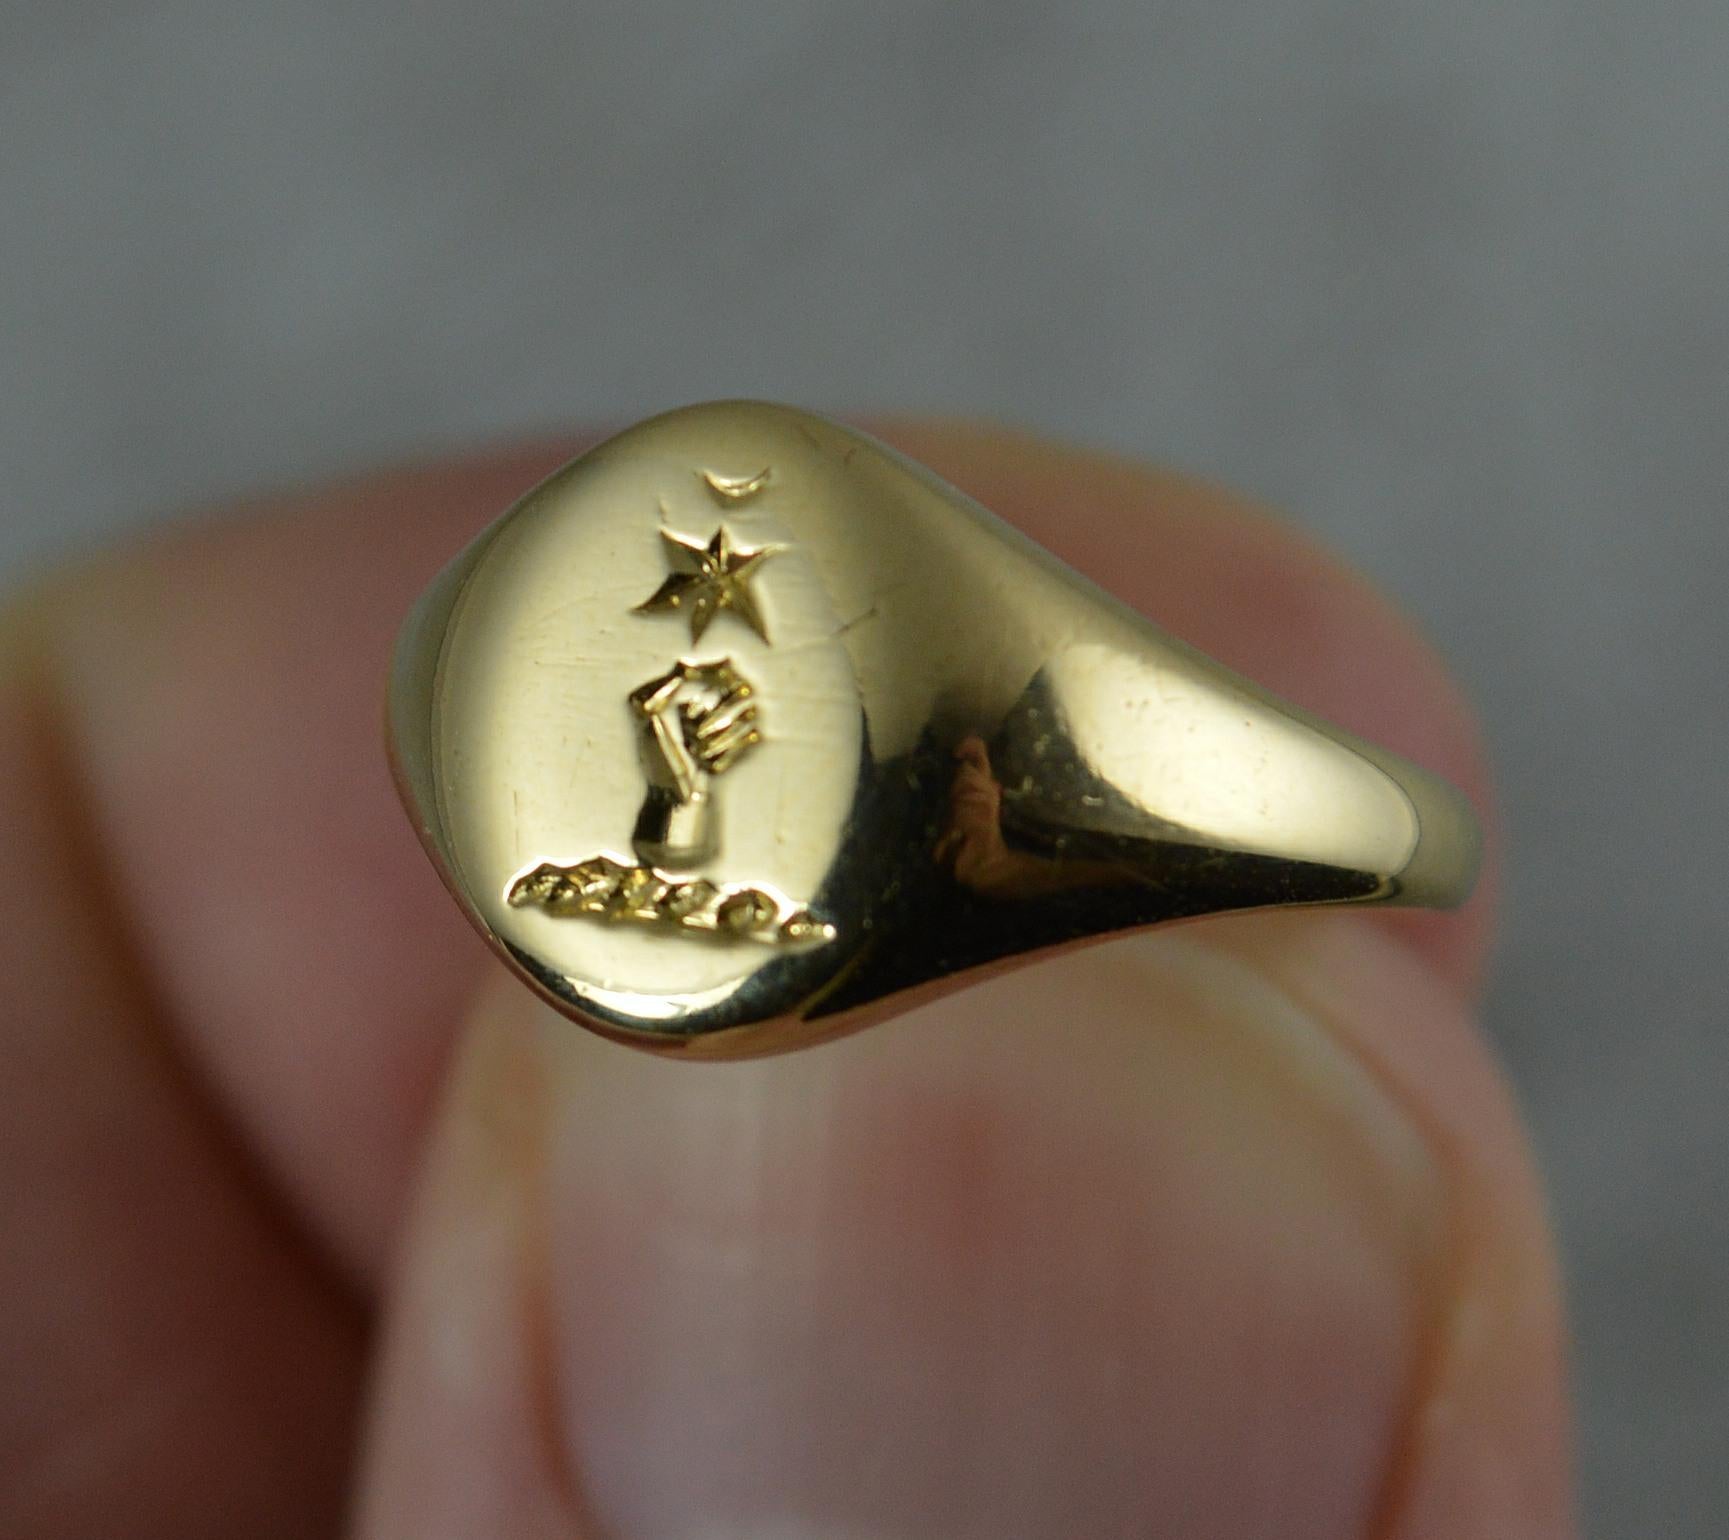 Antique 18 Carat Gold and Clenched Fist and Star Intaglio Seal Signet Ring 1